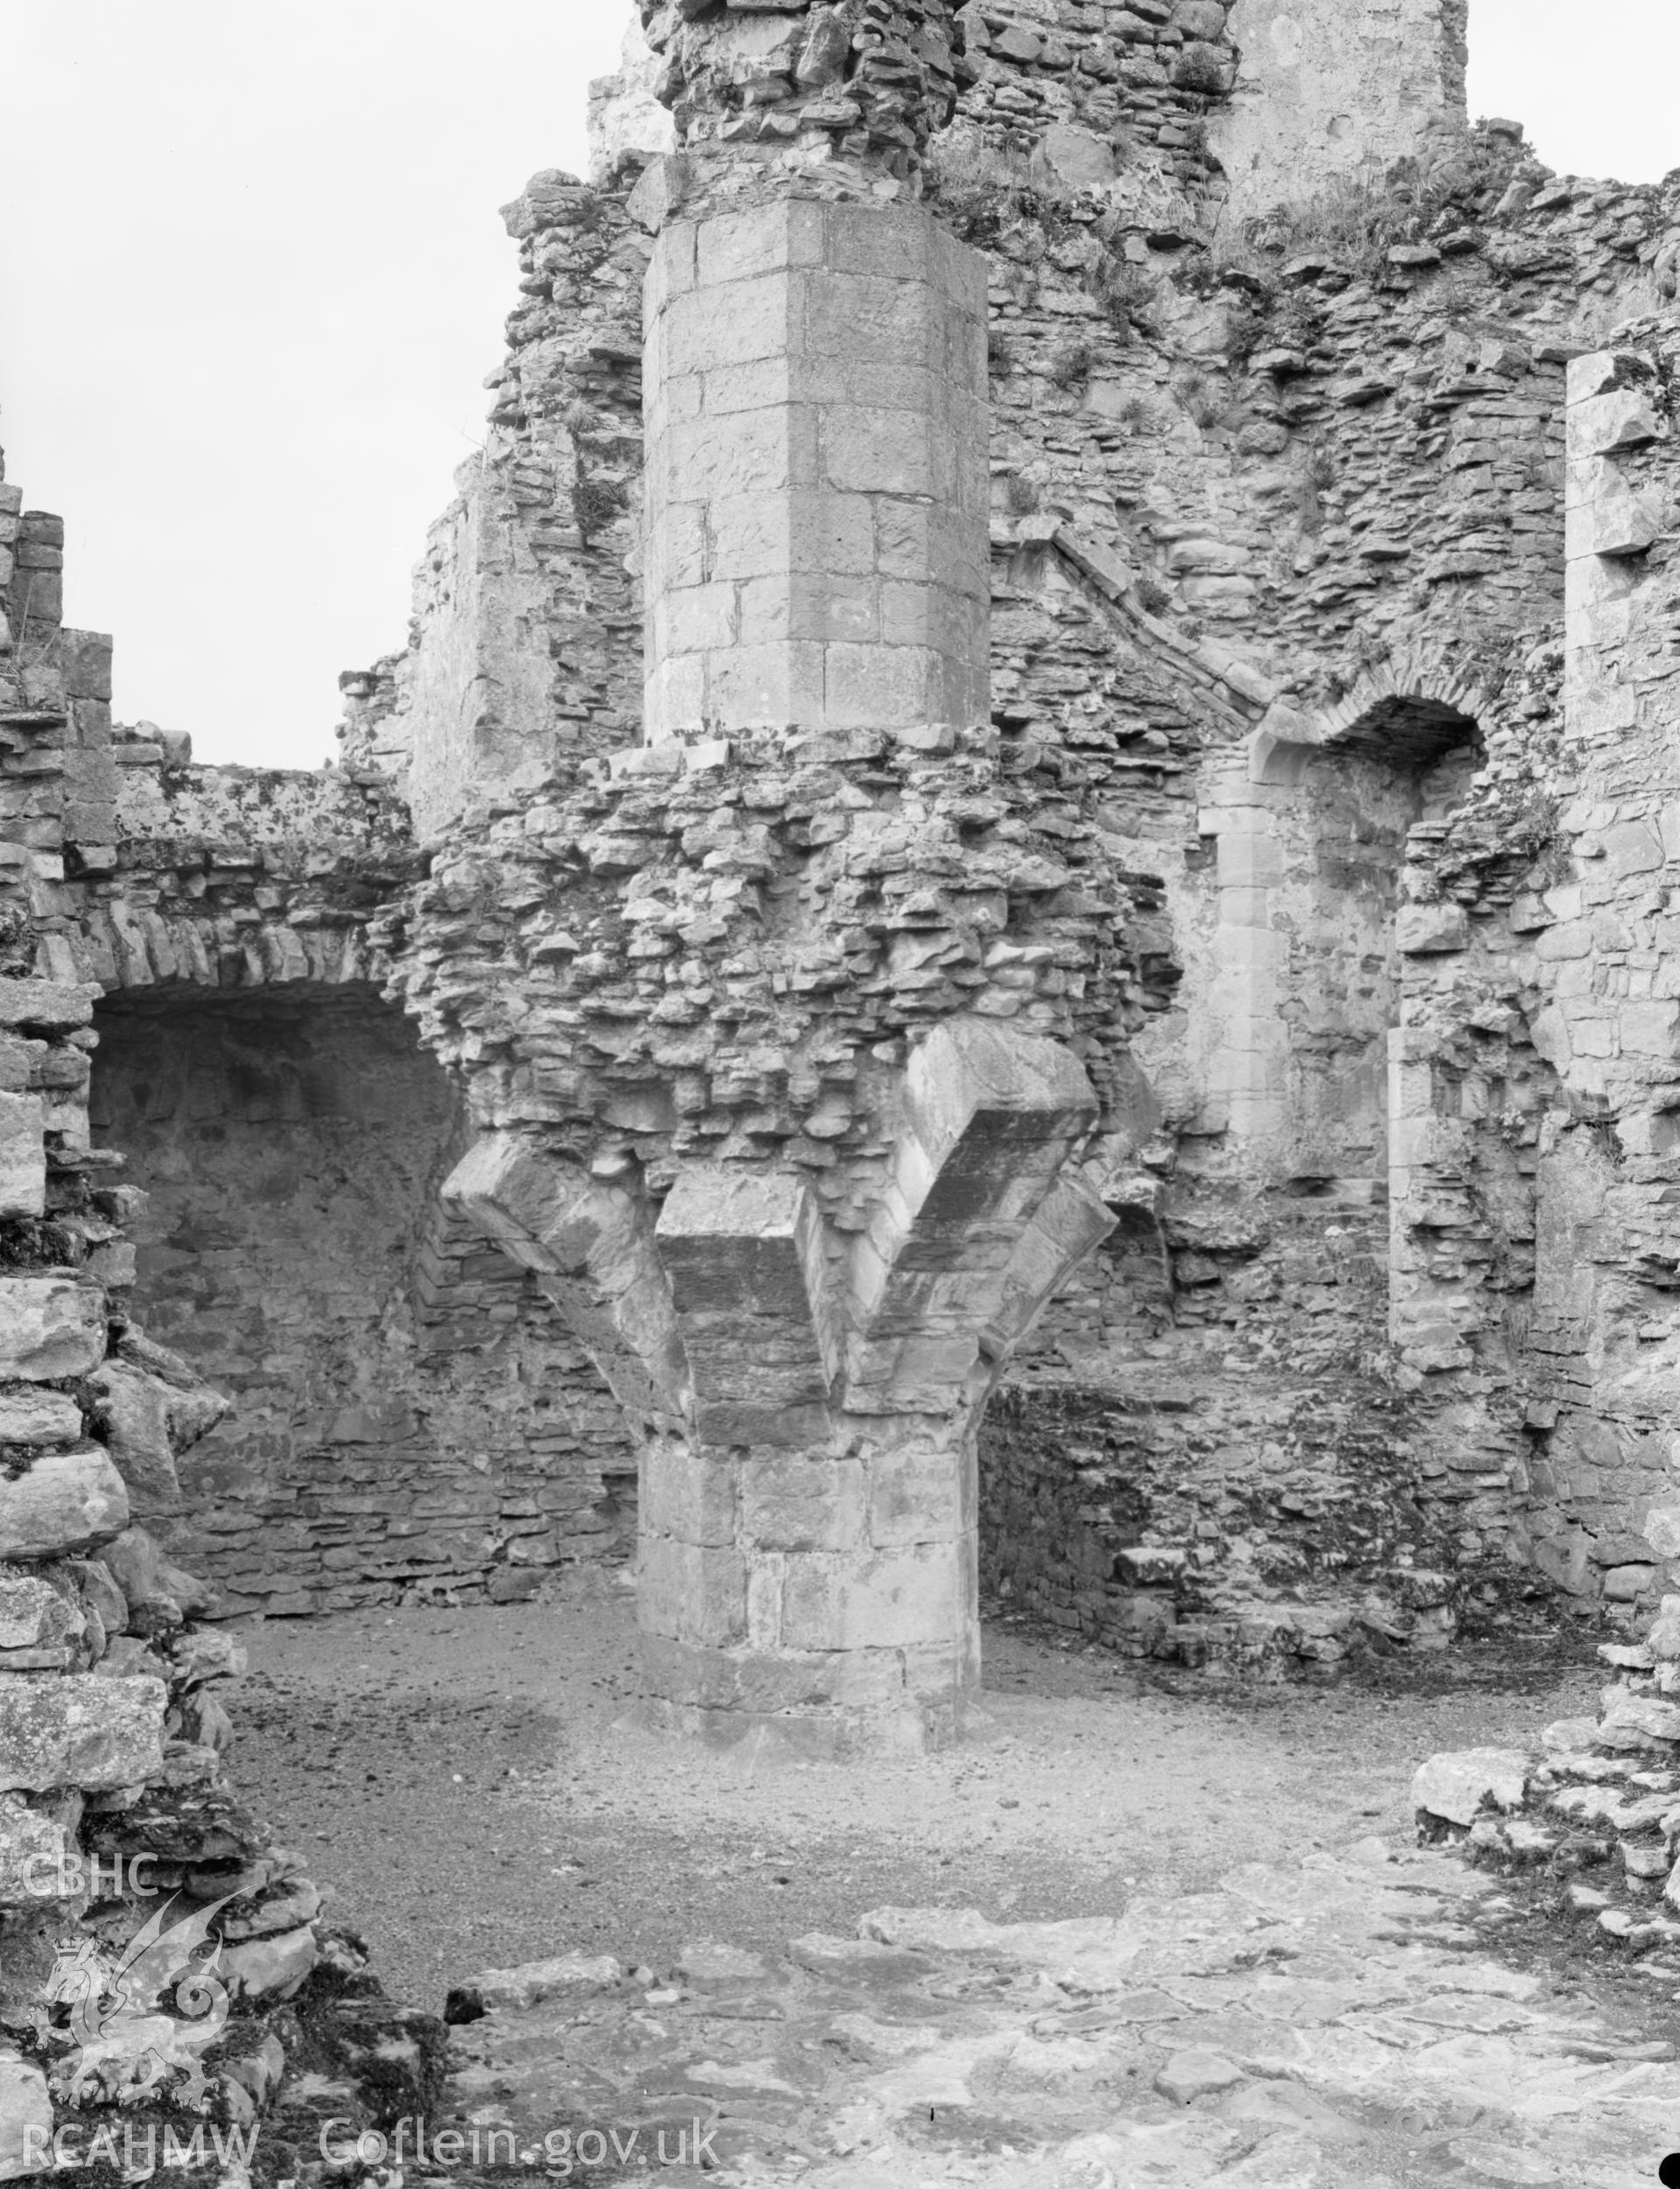 General view of the interior ruins at Coity Castle, Coity Higher taken 09.04.65.